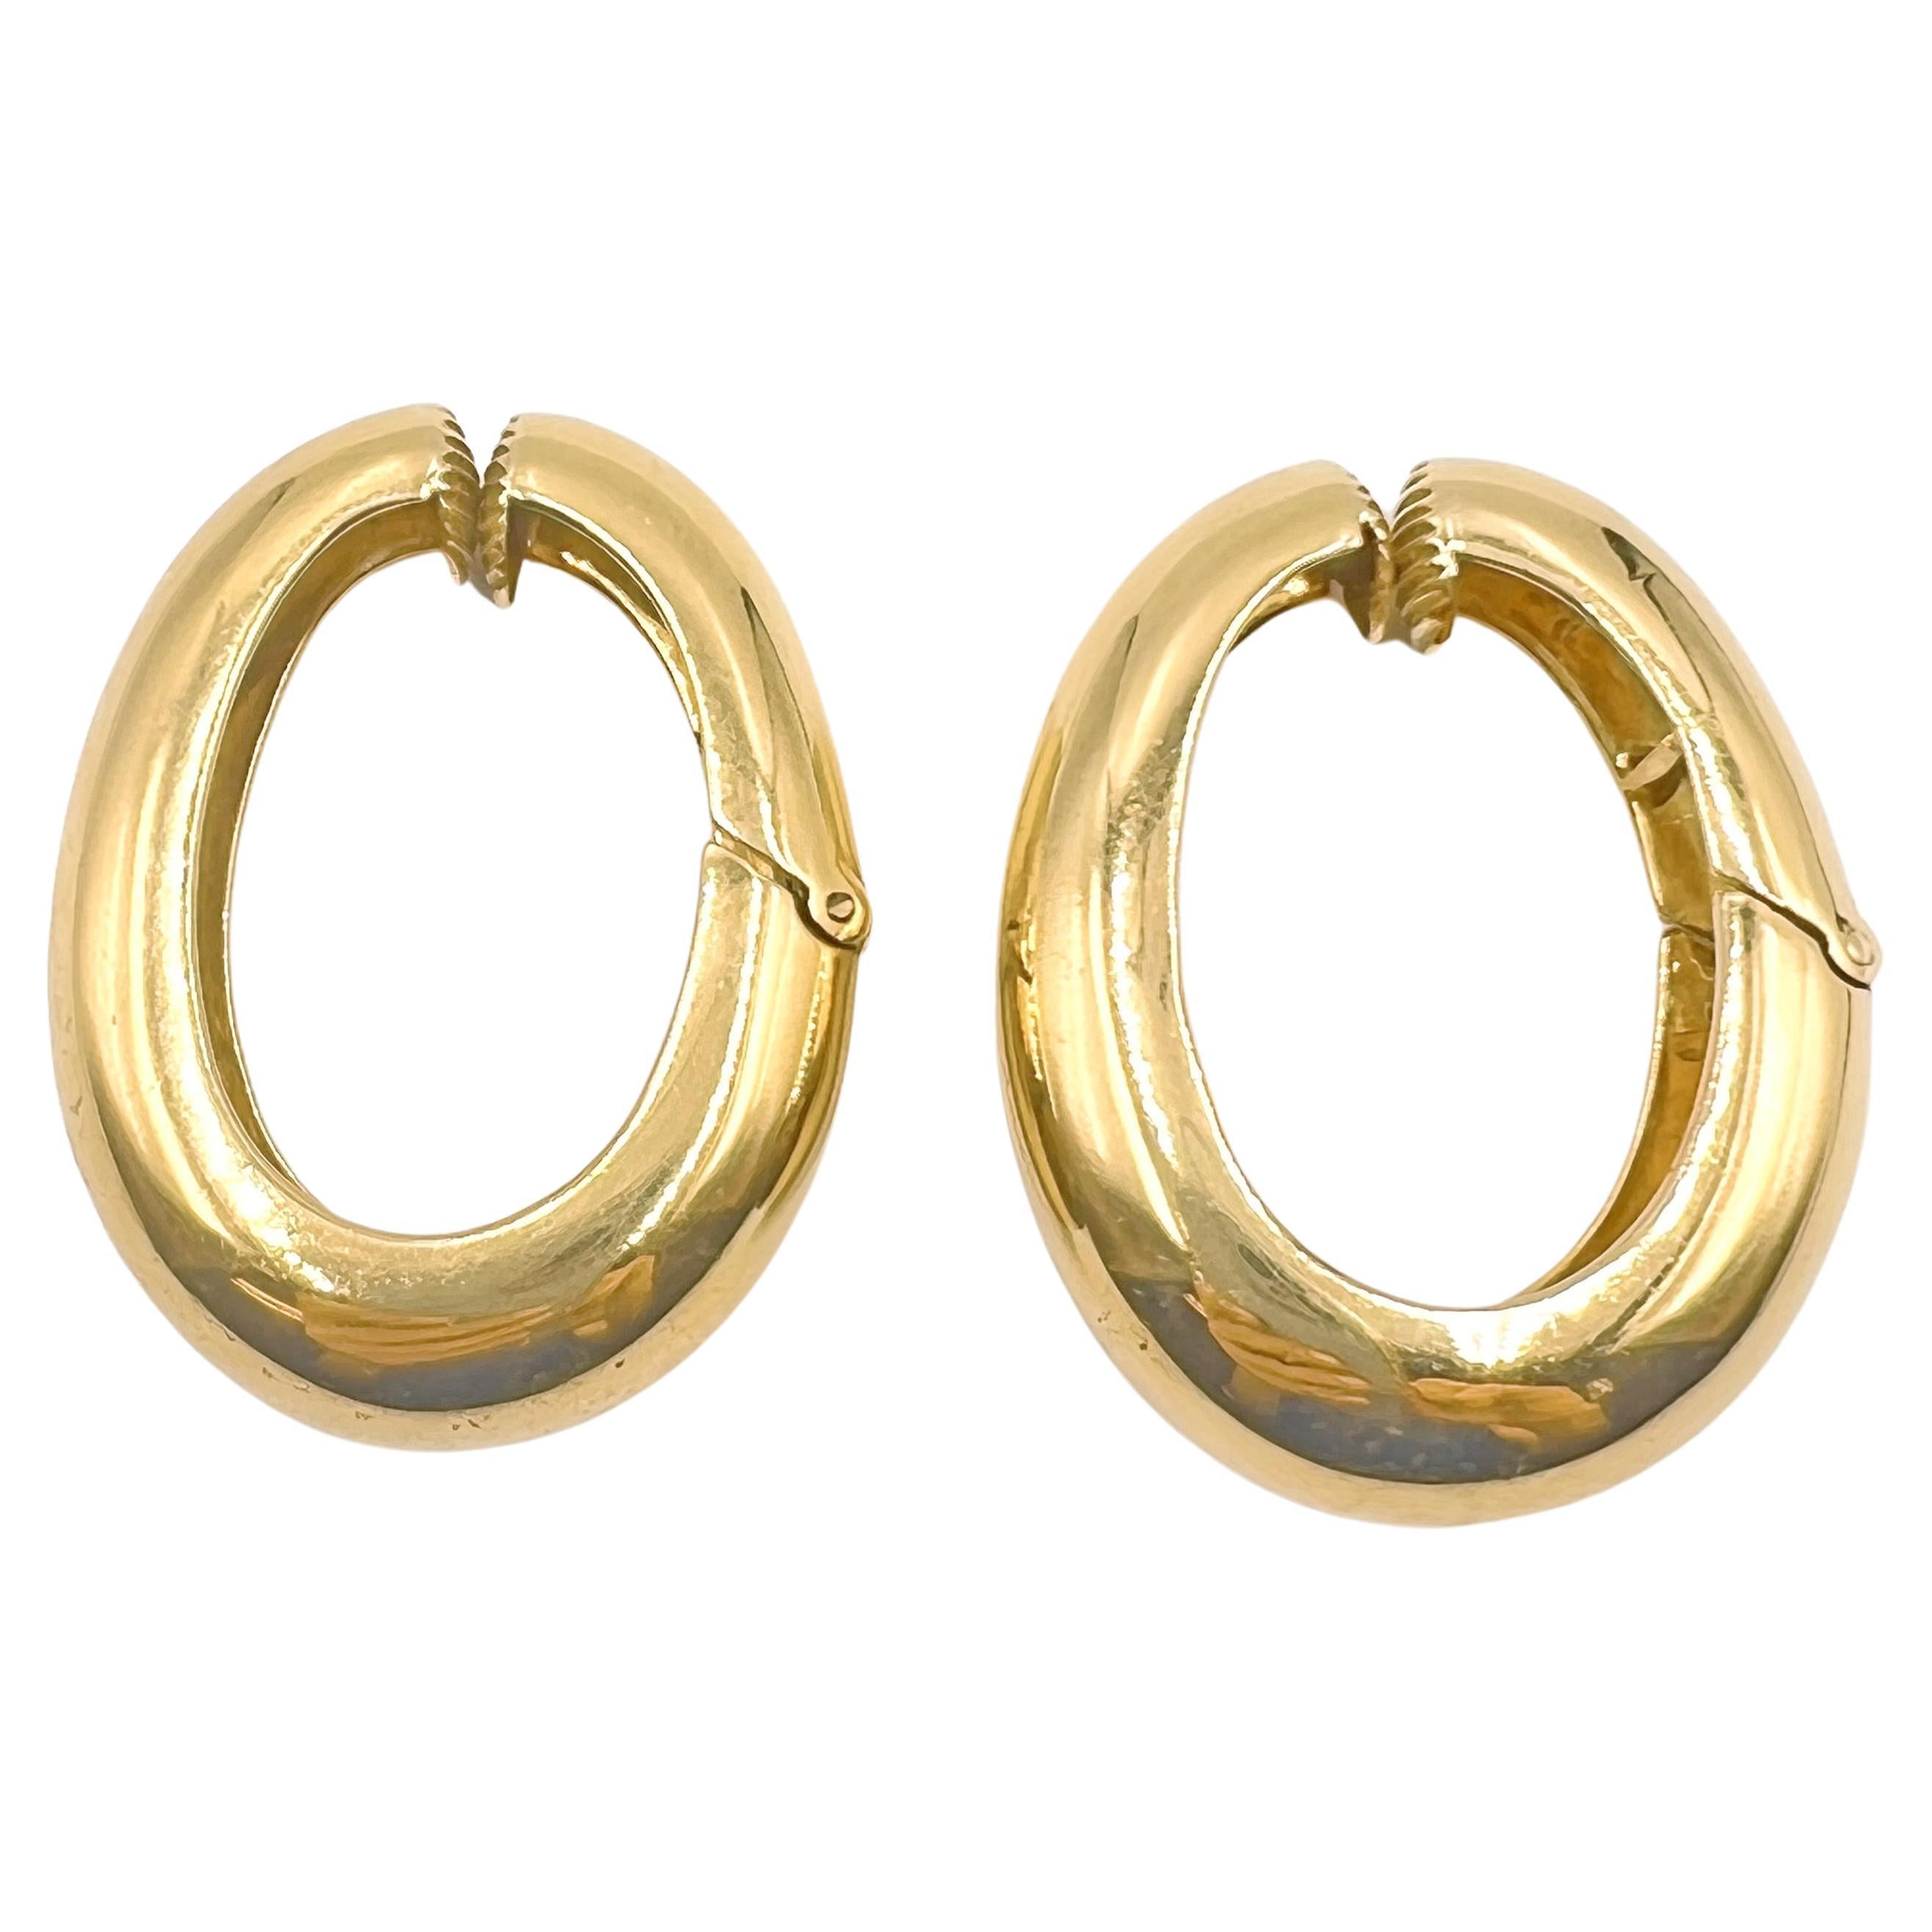 David Webb oval-shaped hoop earrings in polished 18k yellow gold.  Tapered, curved design measuring 1.5